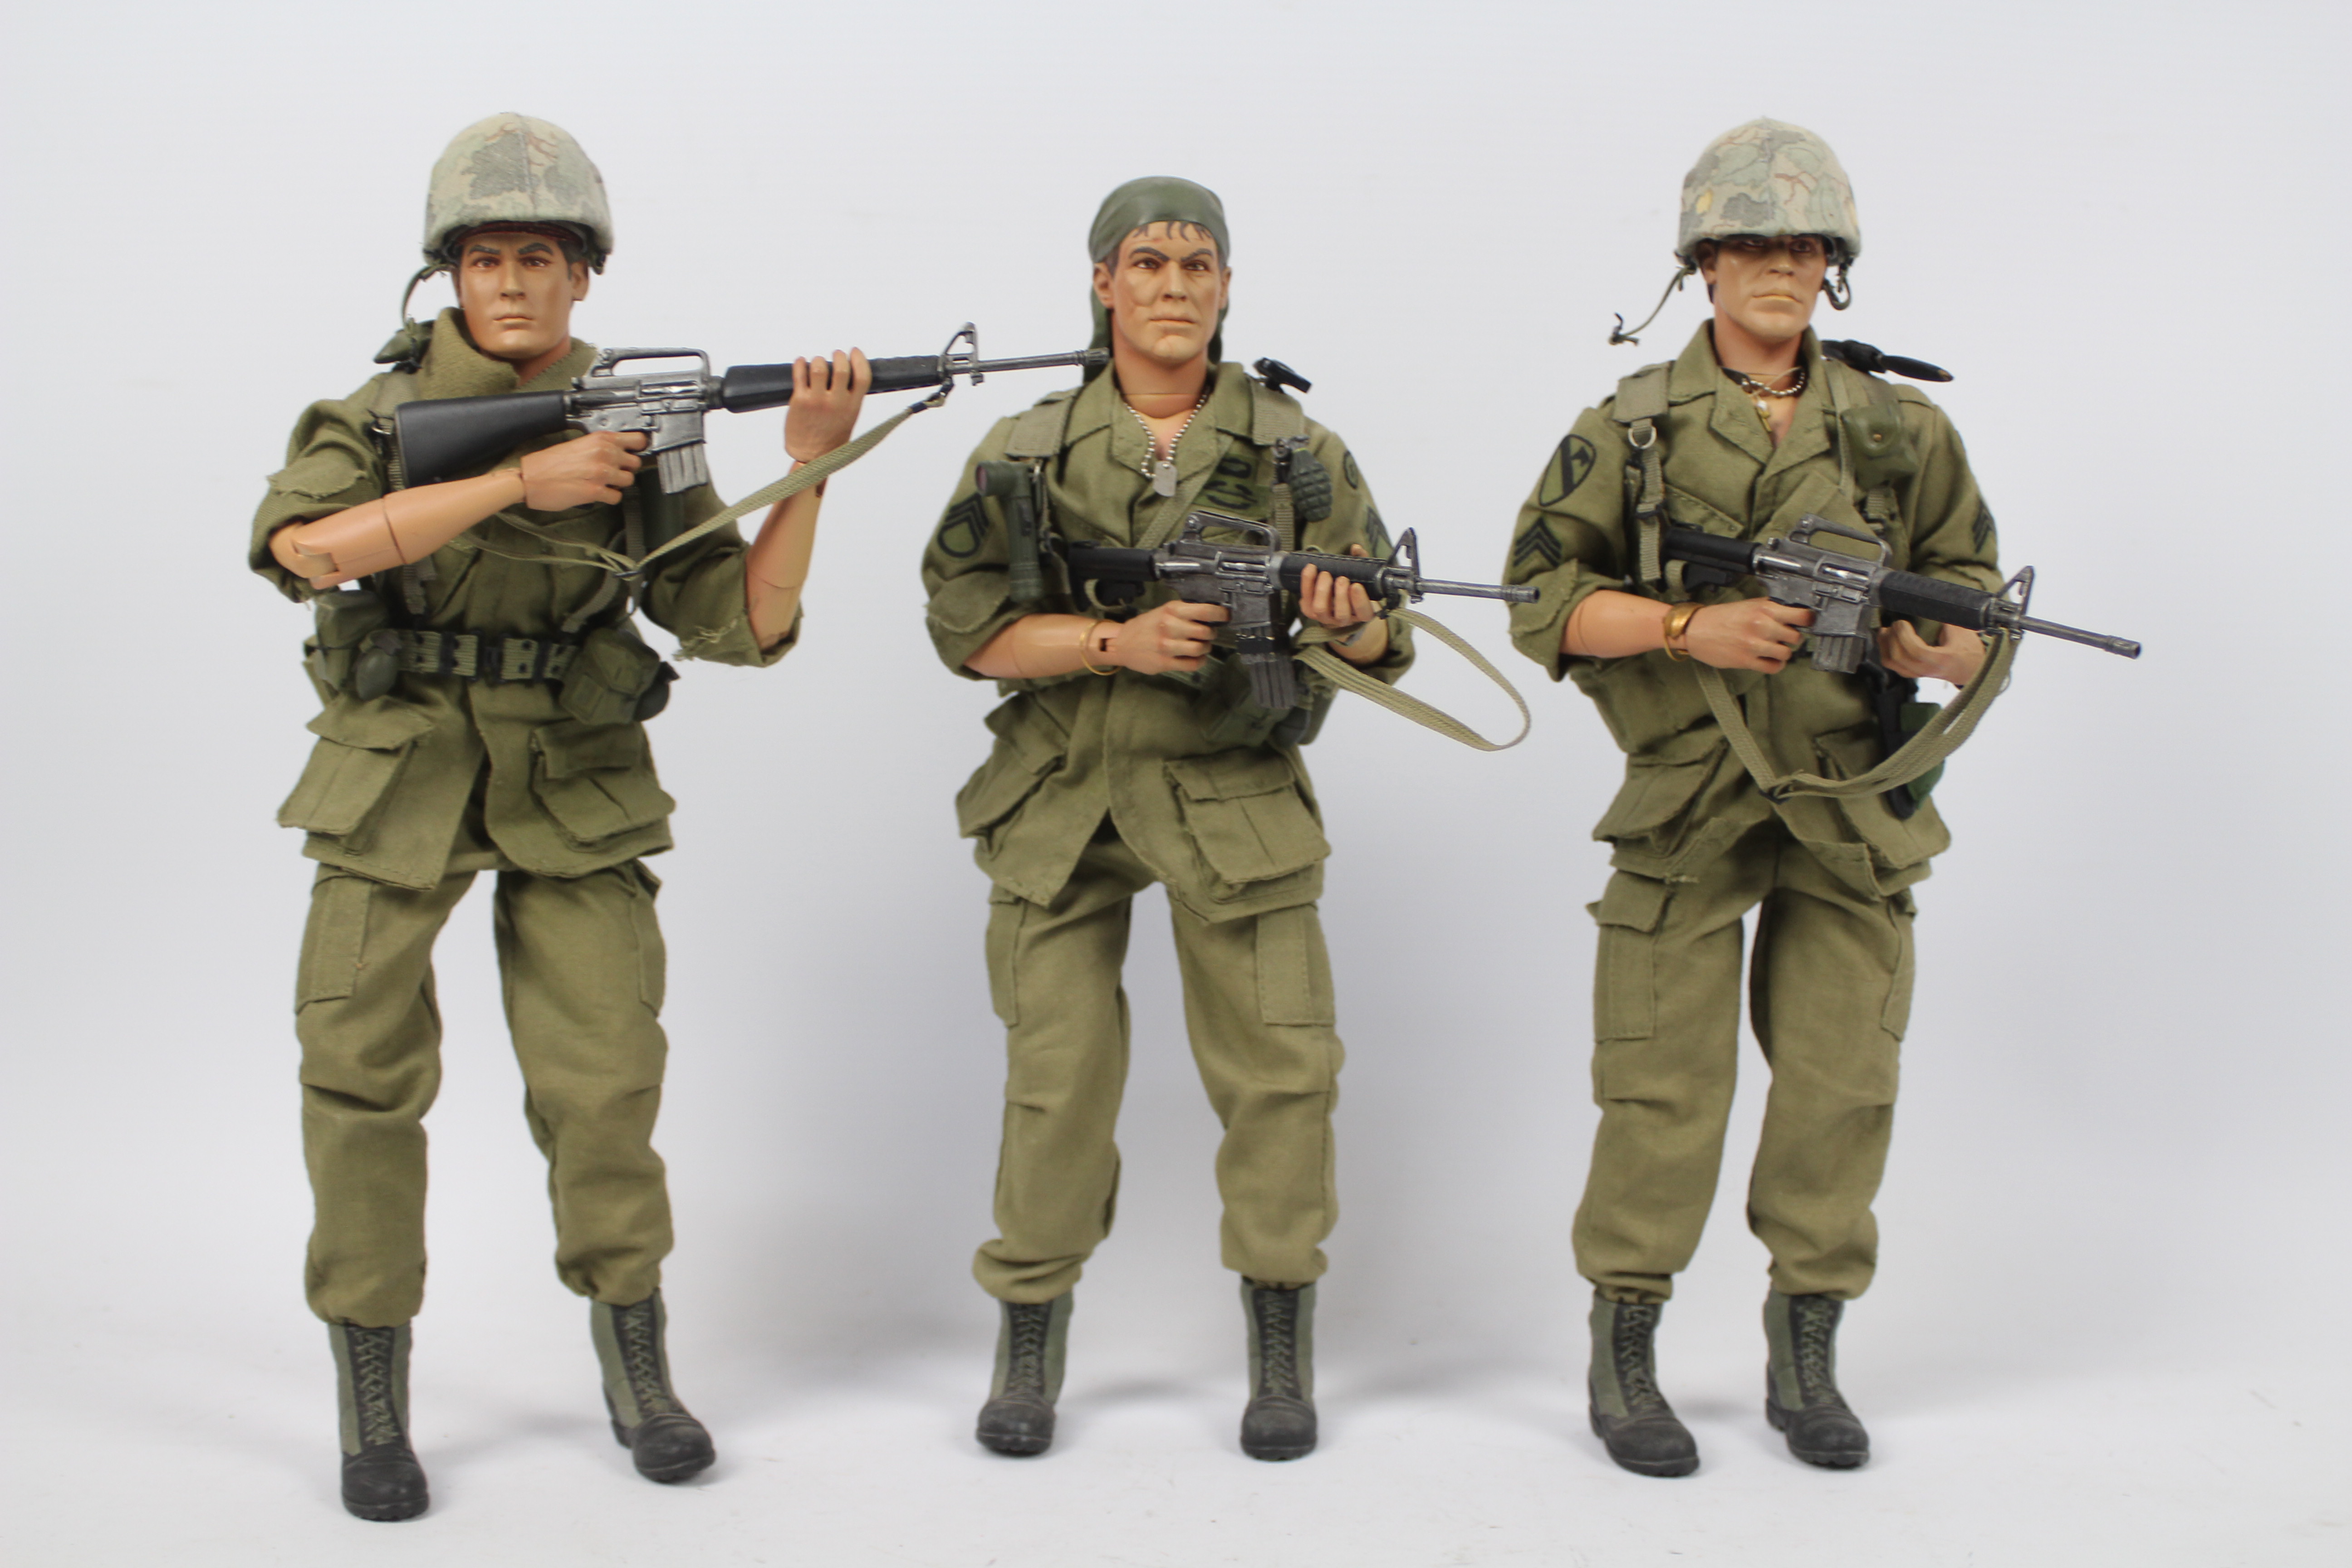 Sideshow Collectibles - Three unboxed 1:6 scale action figures from Sideshows 'Platoon' series,